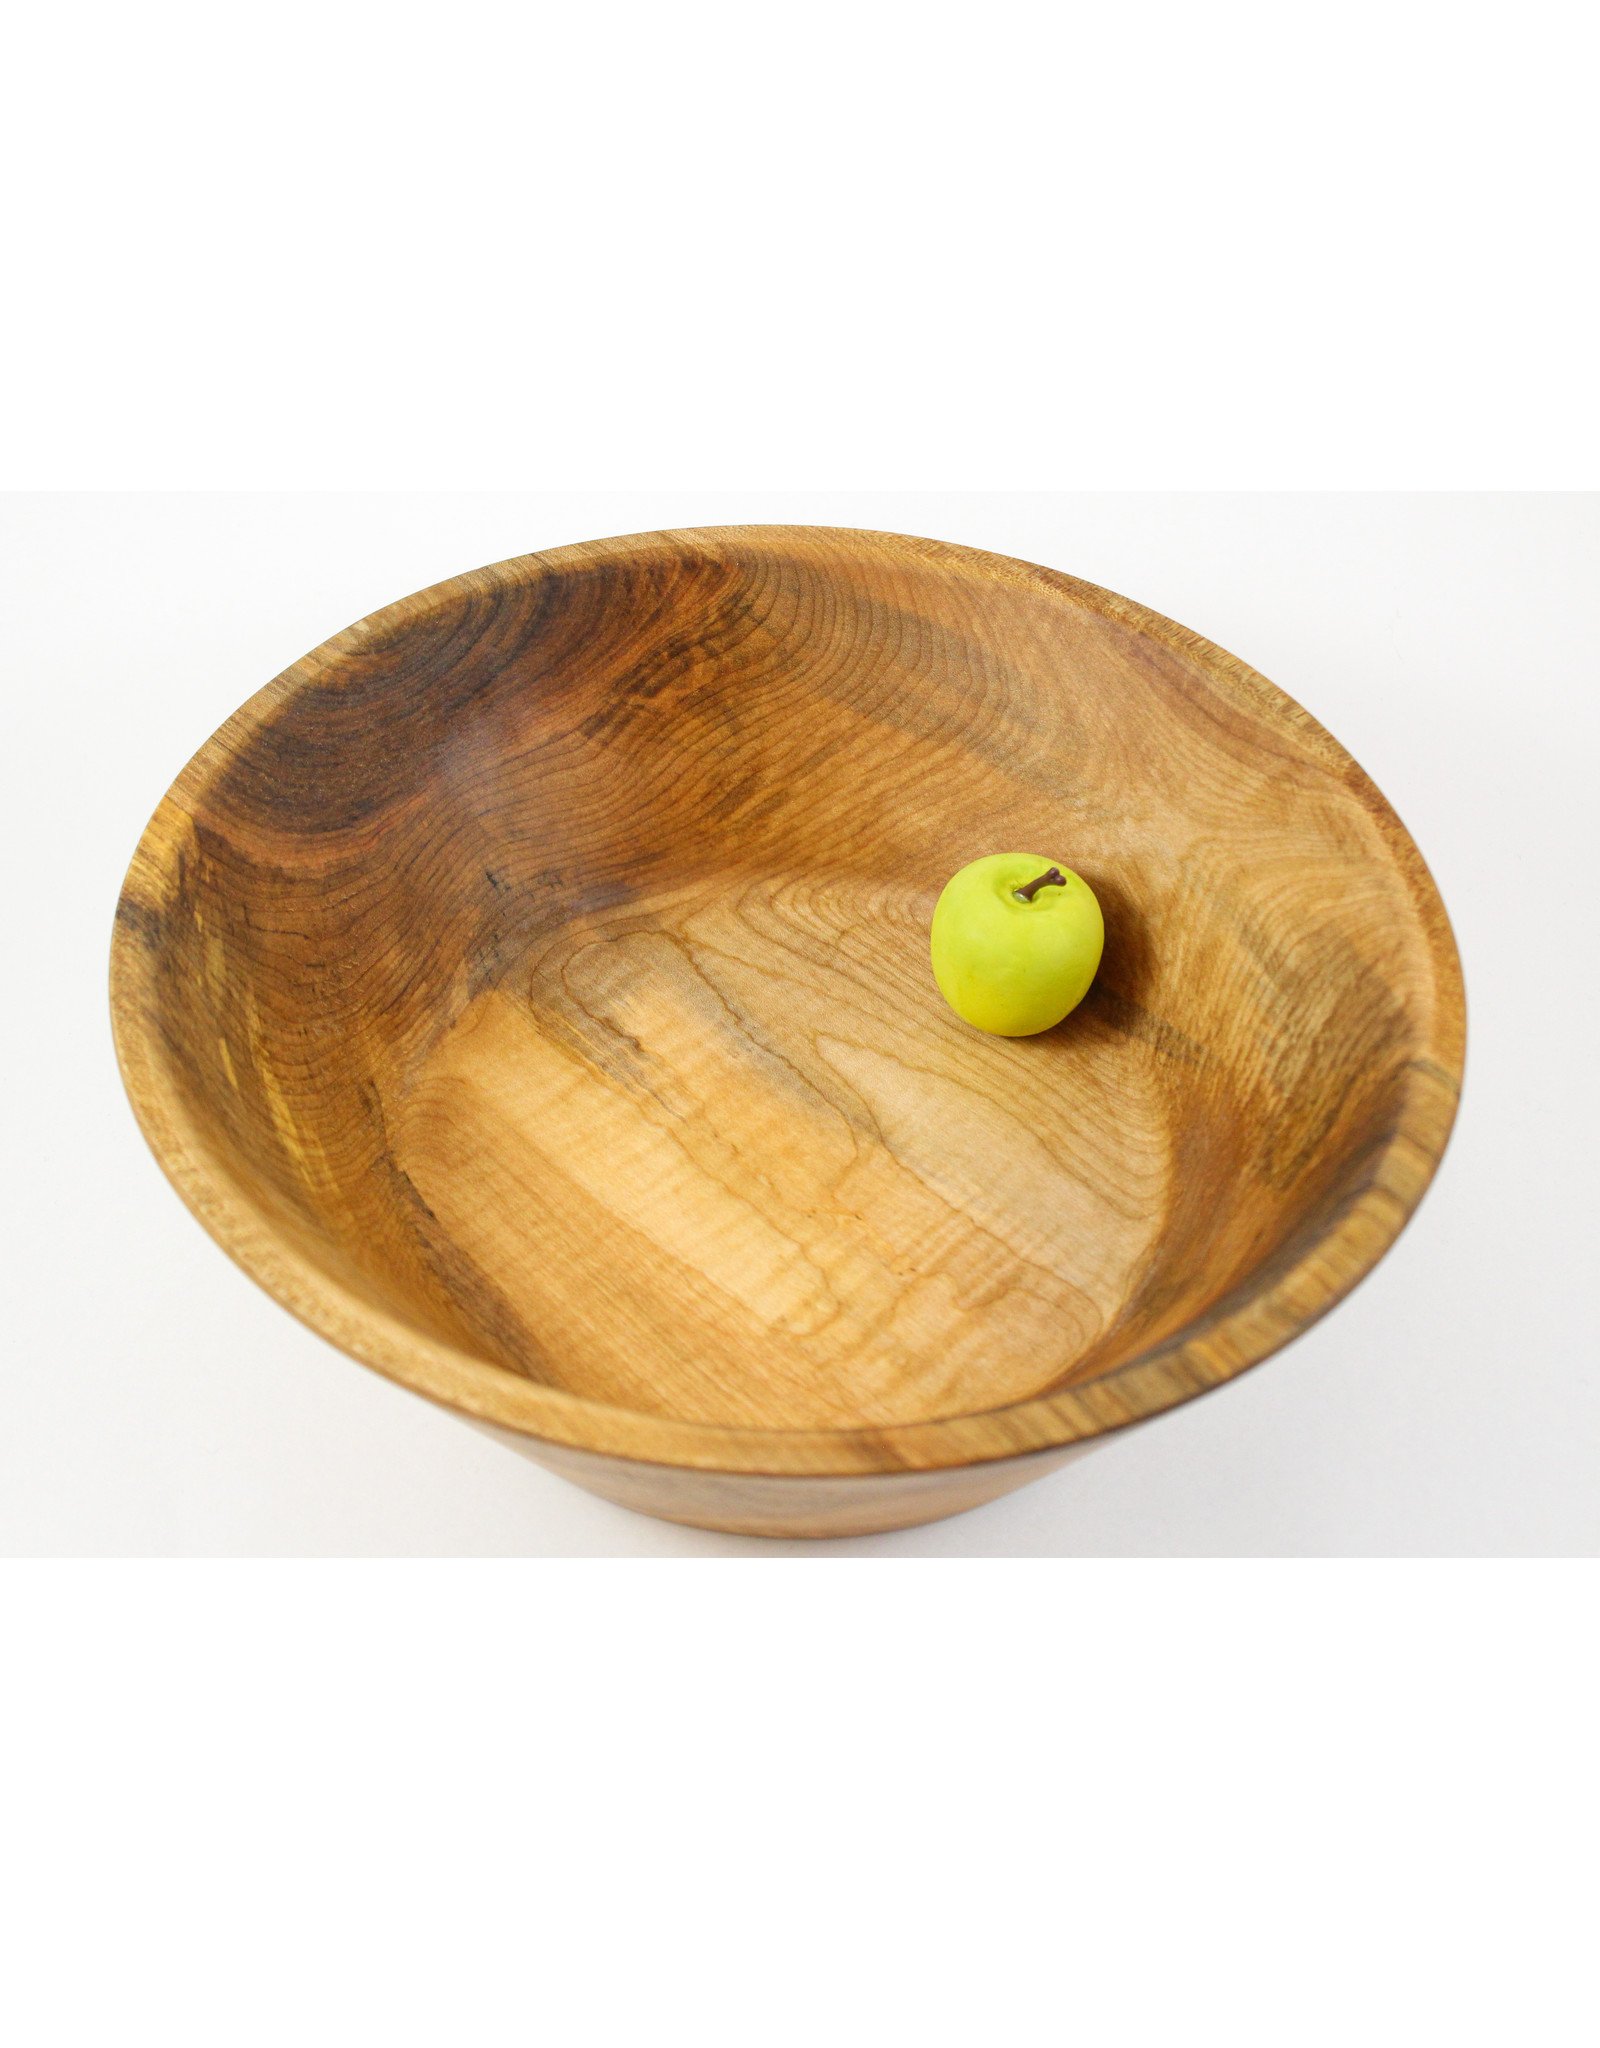 Phil Jones - The Bowl Guy Spalted Maple Bowl by The Bowl Guy